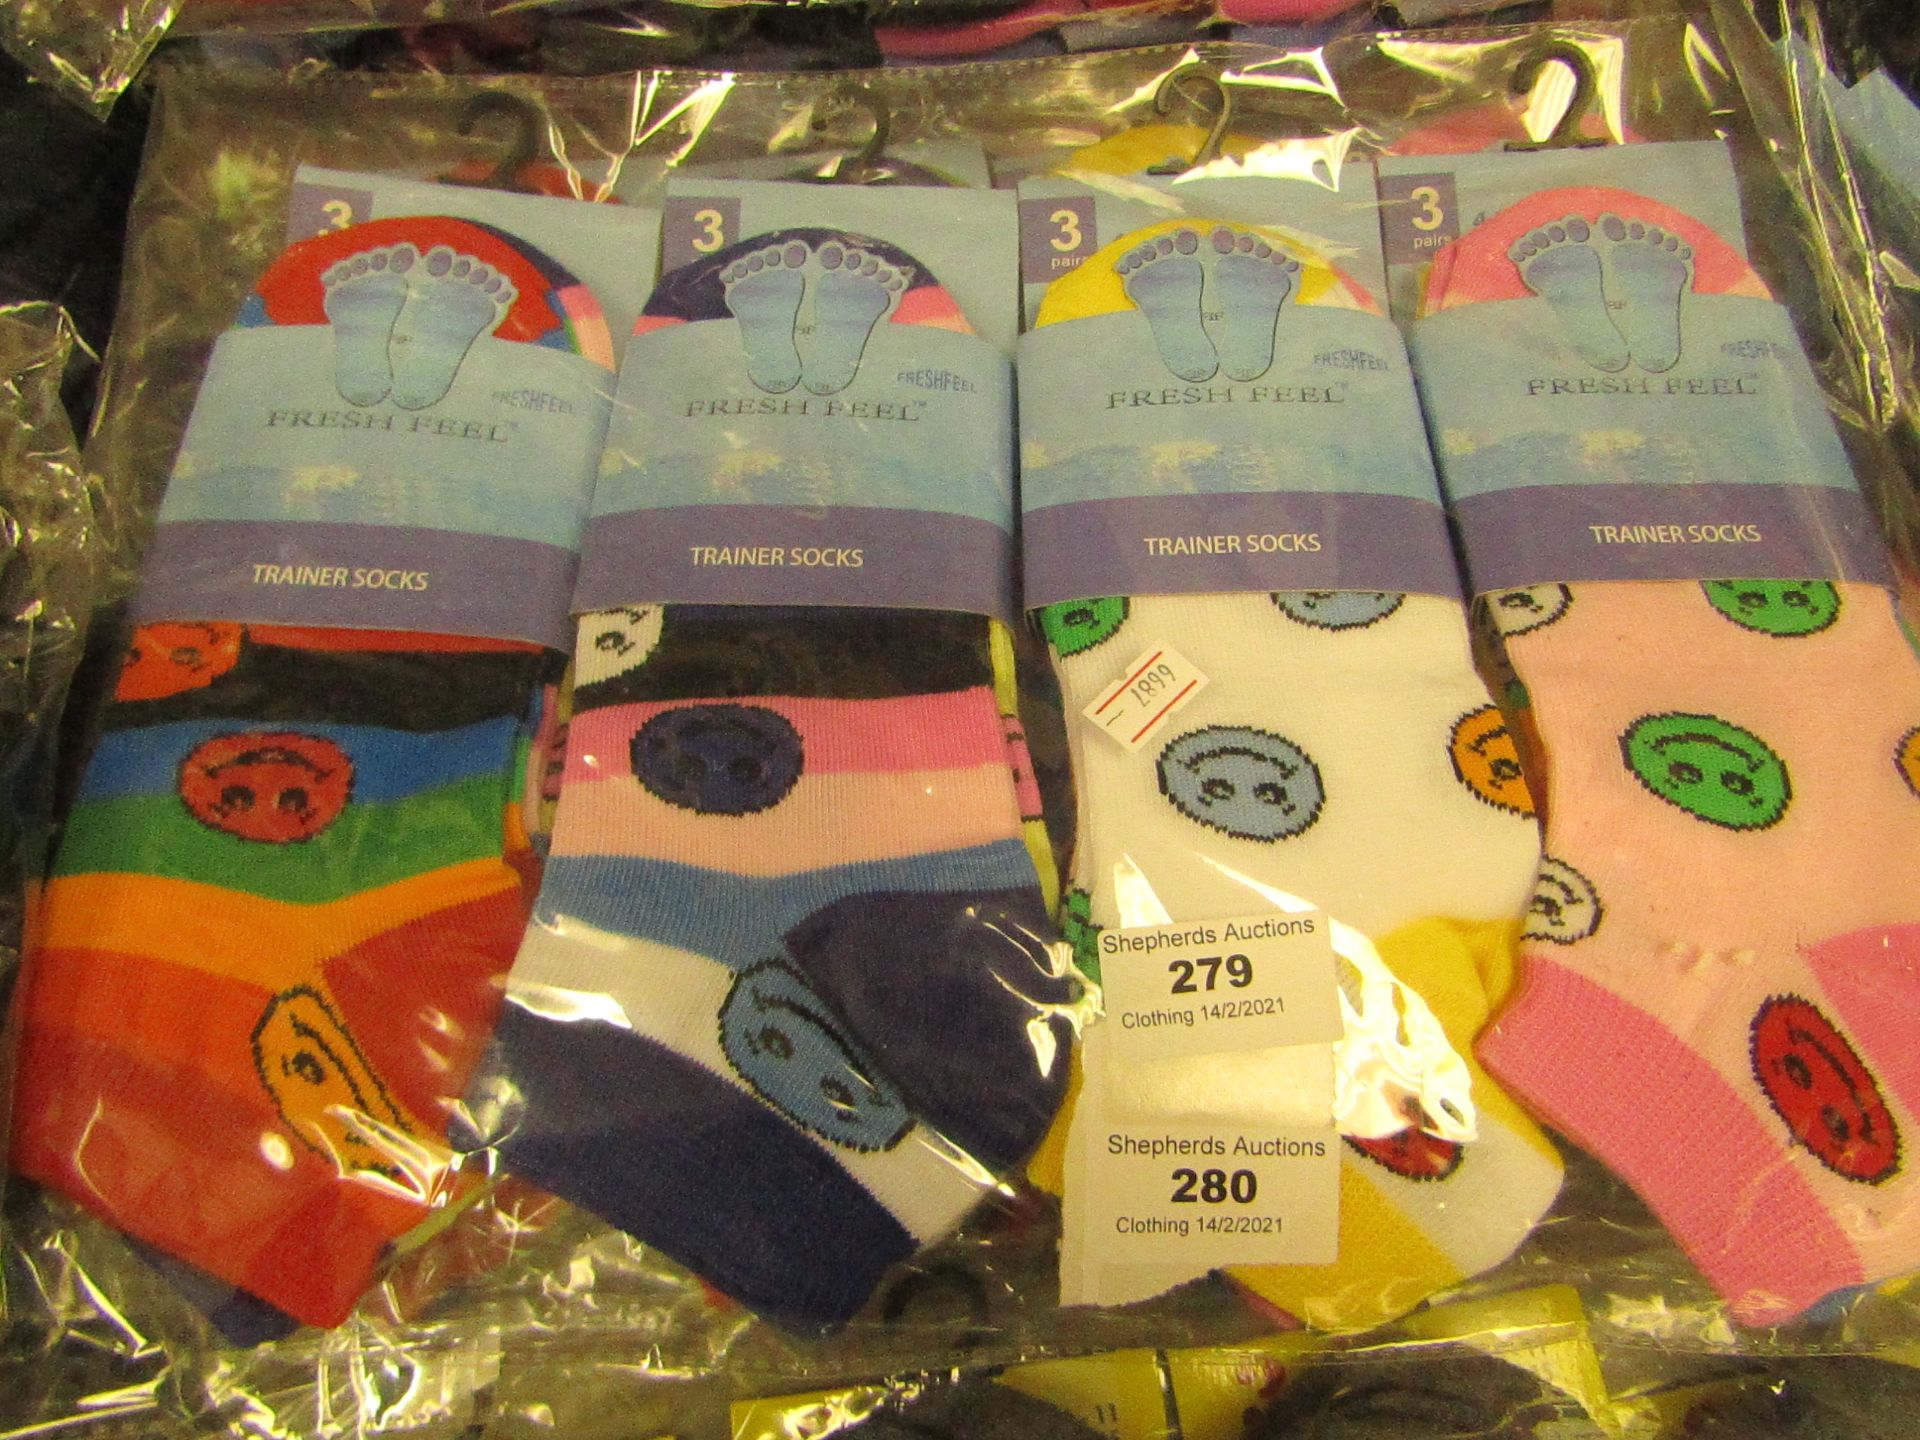 12 X Pairs of Ladies Trainer Socks Size 4-7 New & Packaged